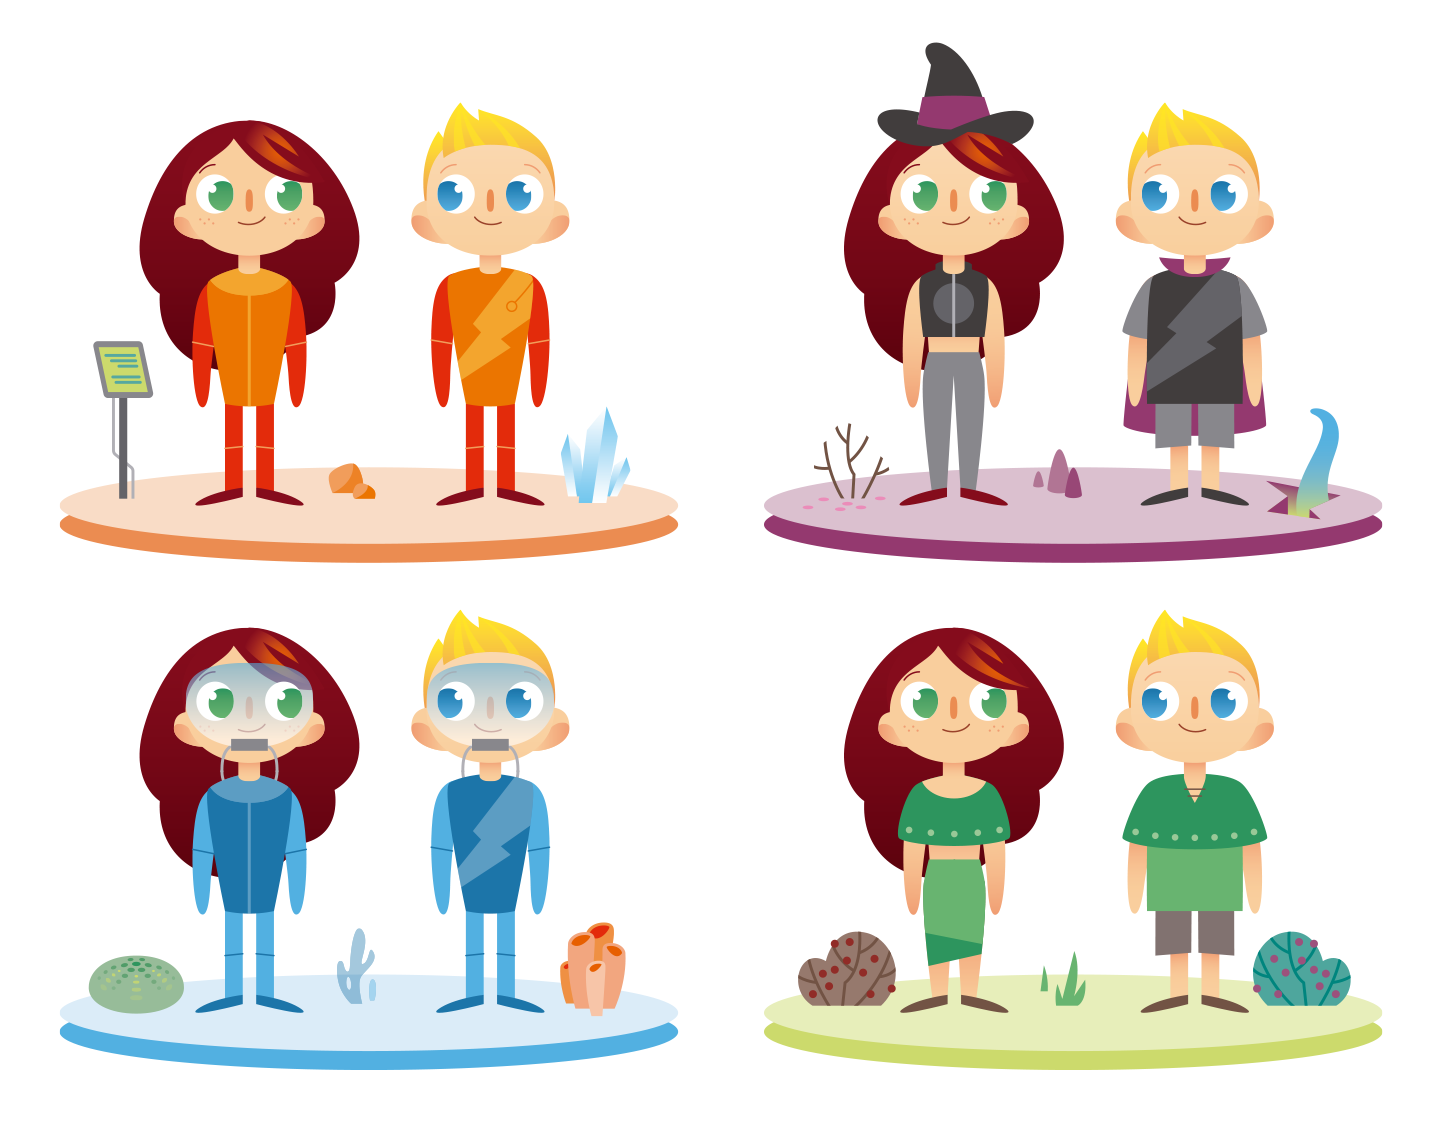 Character Designs for Kids Collection